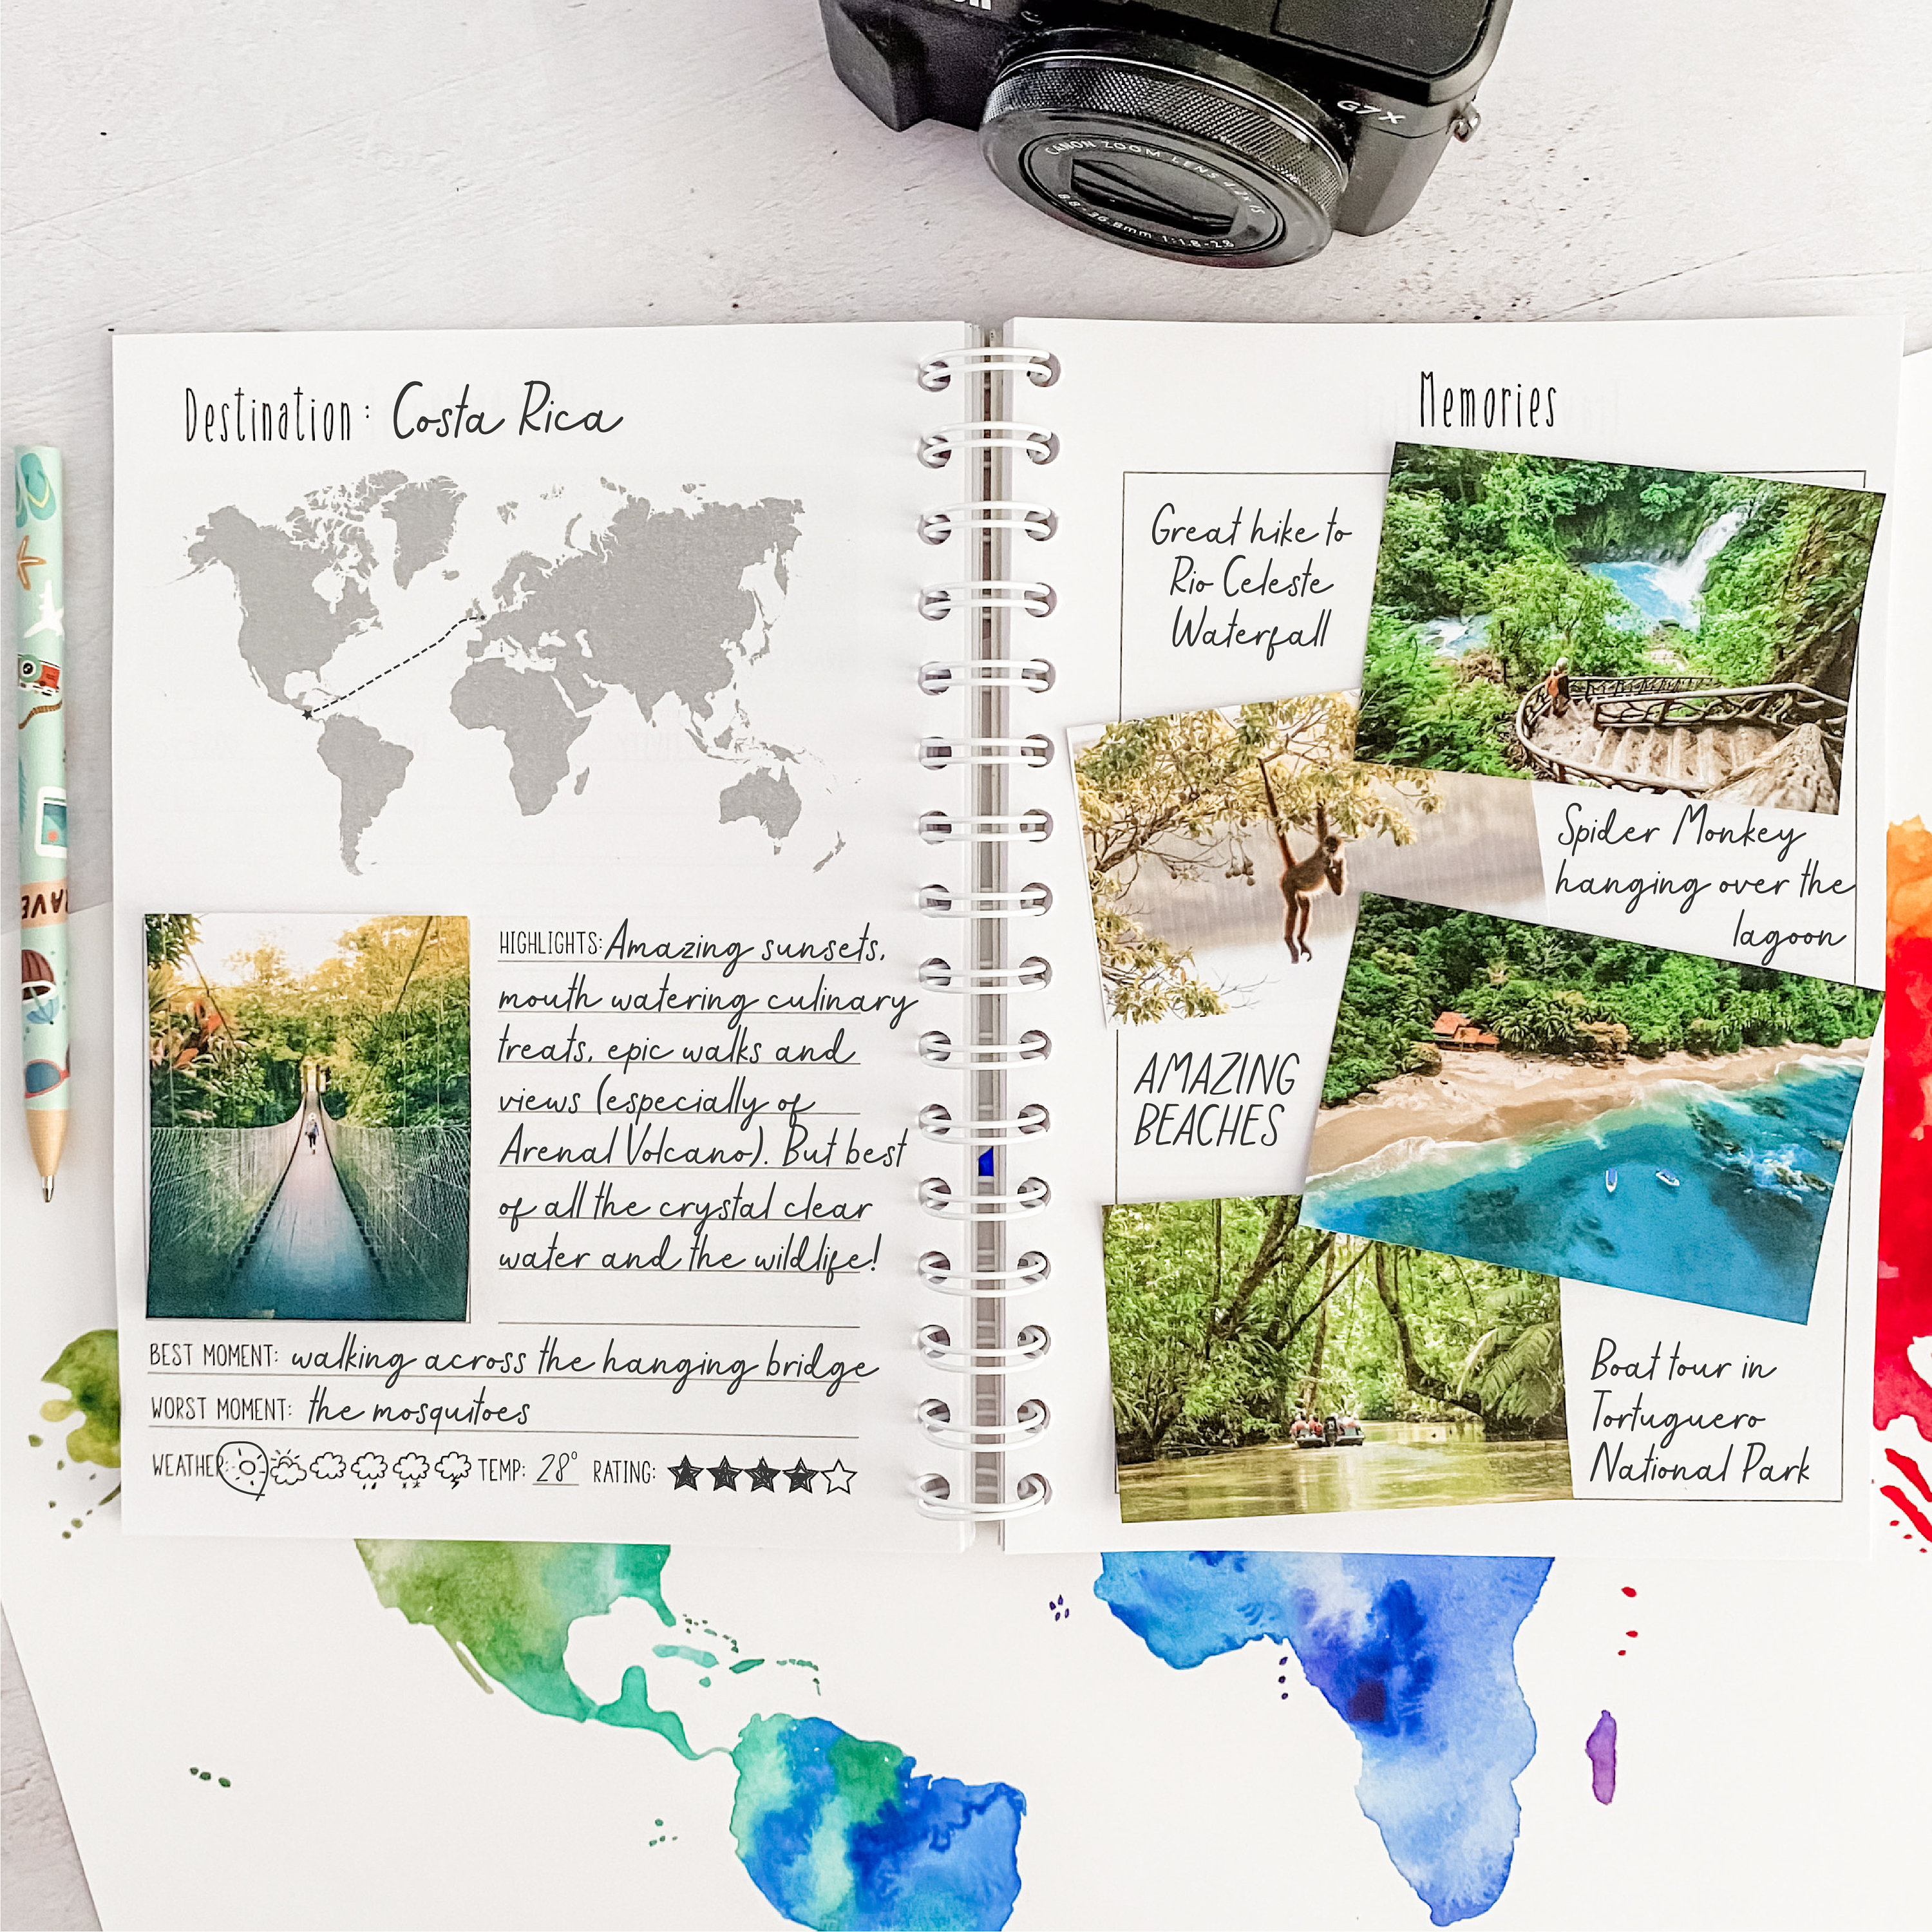 Brilliant Travel Journal Ideas For your Next Adventure - TRAVEL